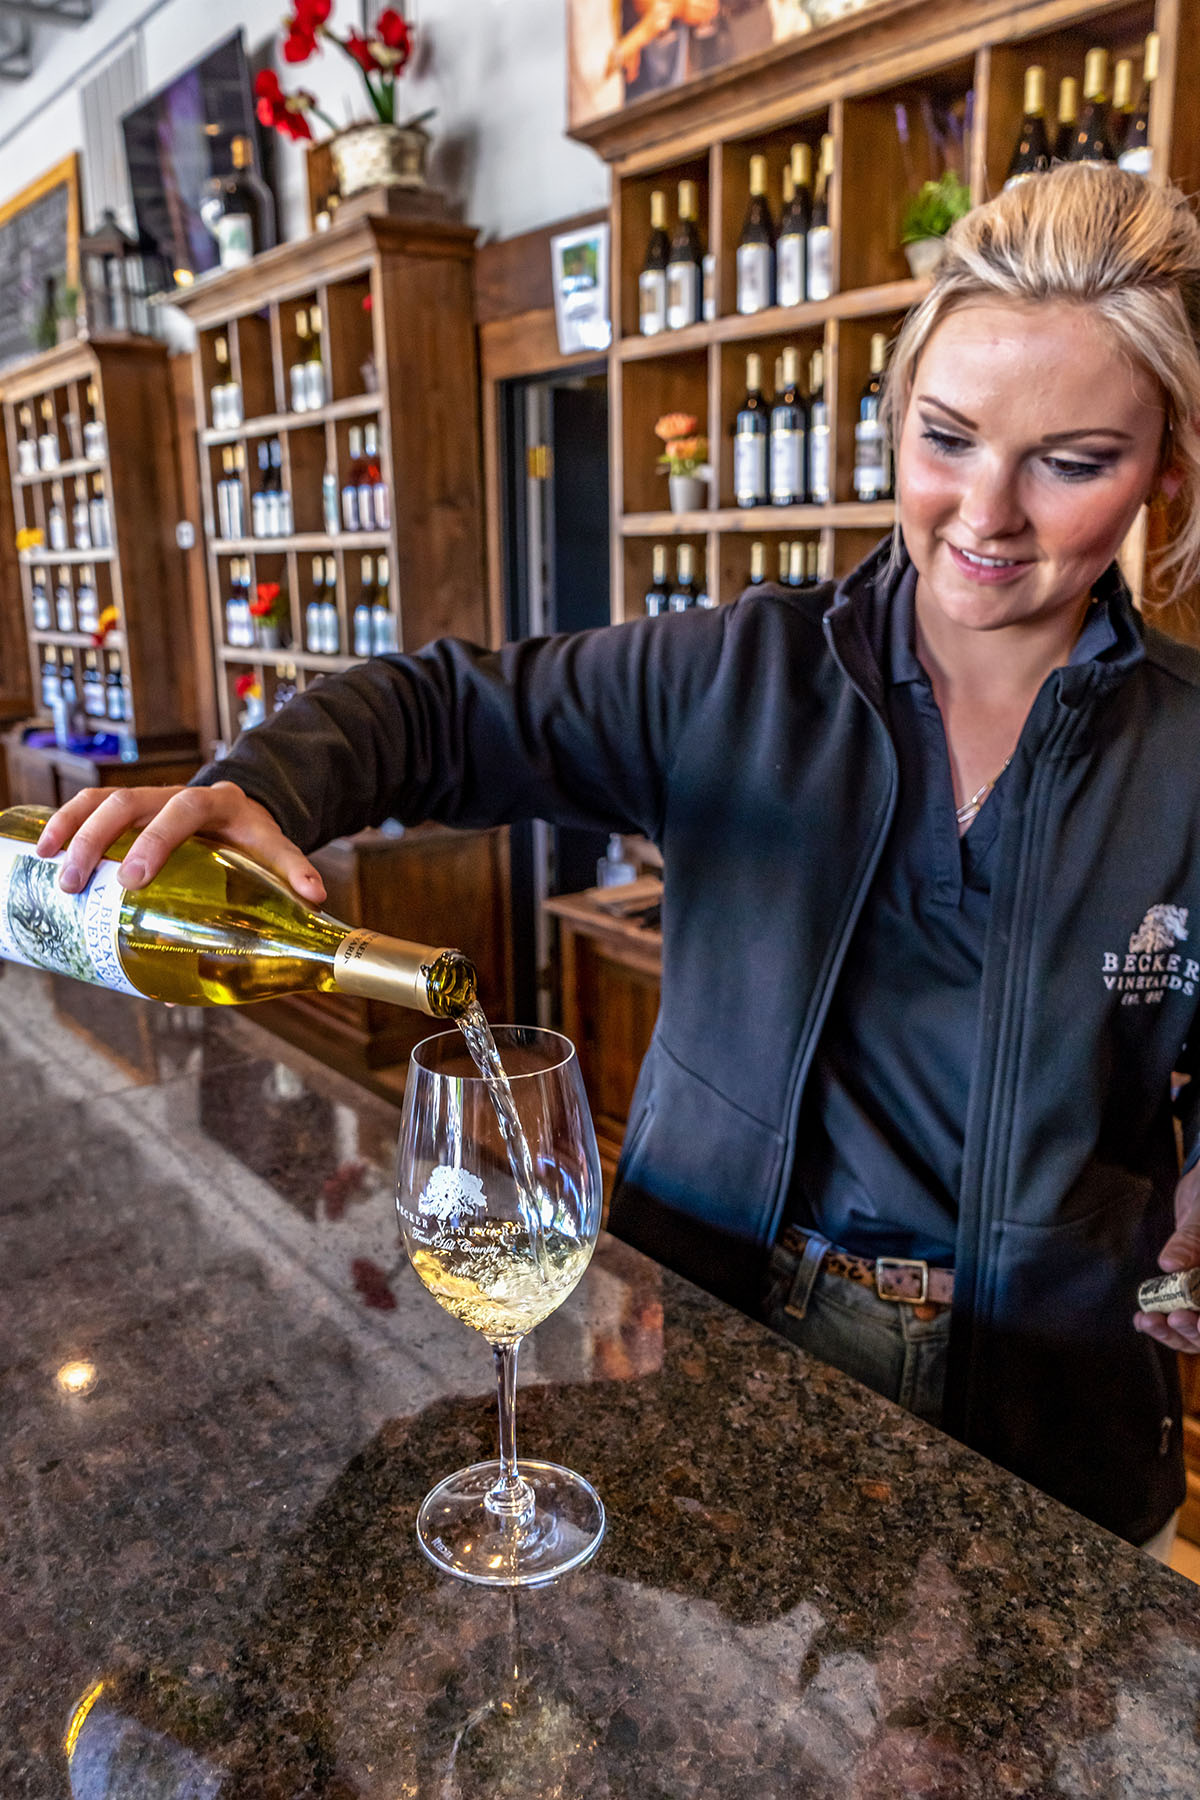 A woman in a black shirt pours white wine into a glass reading "Becker Vineyards"